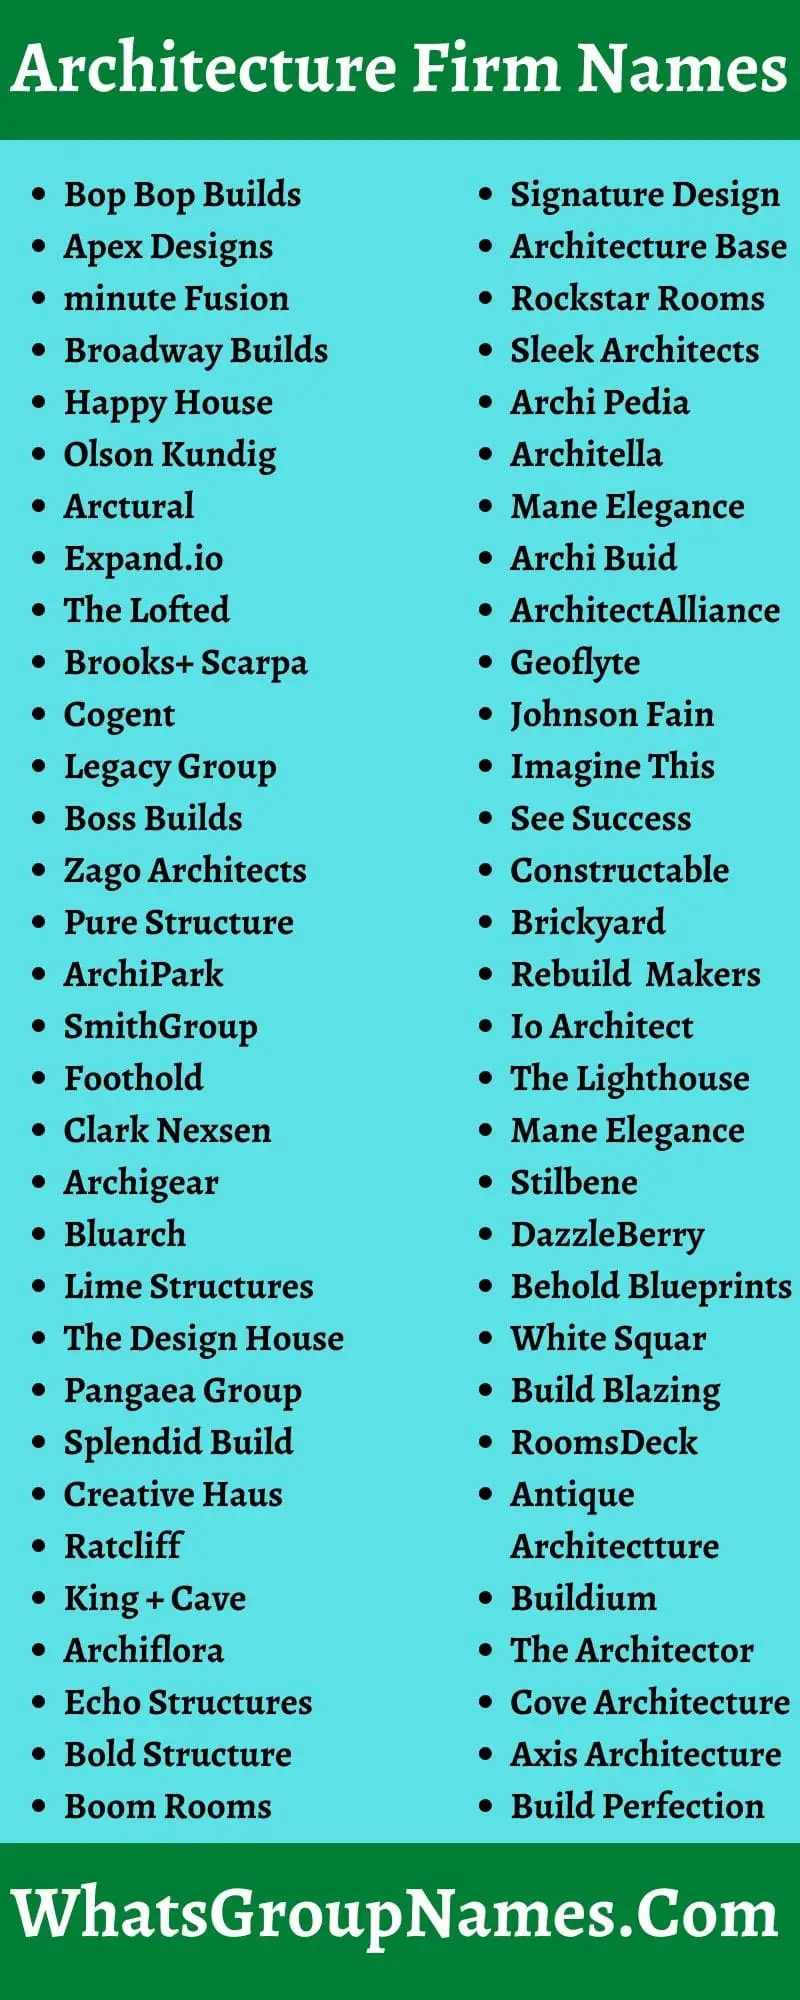 Architecture Firm Names